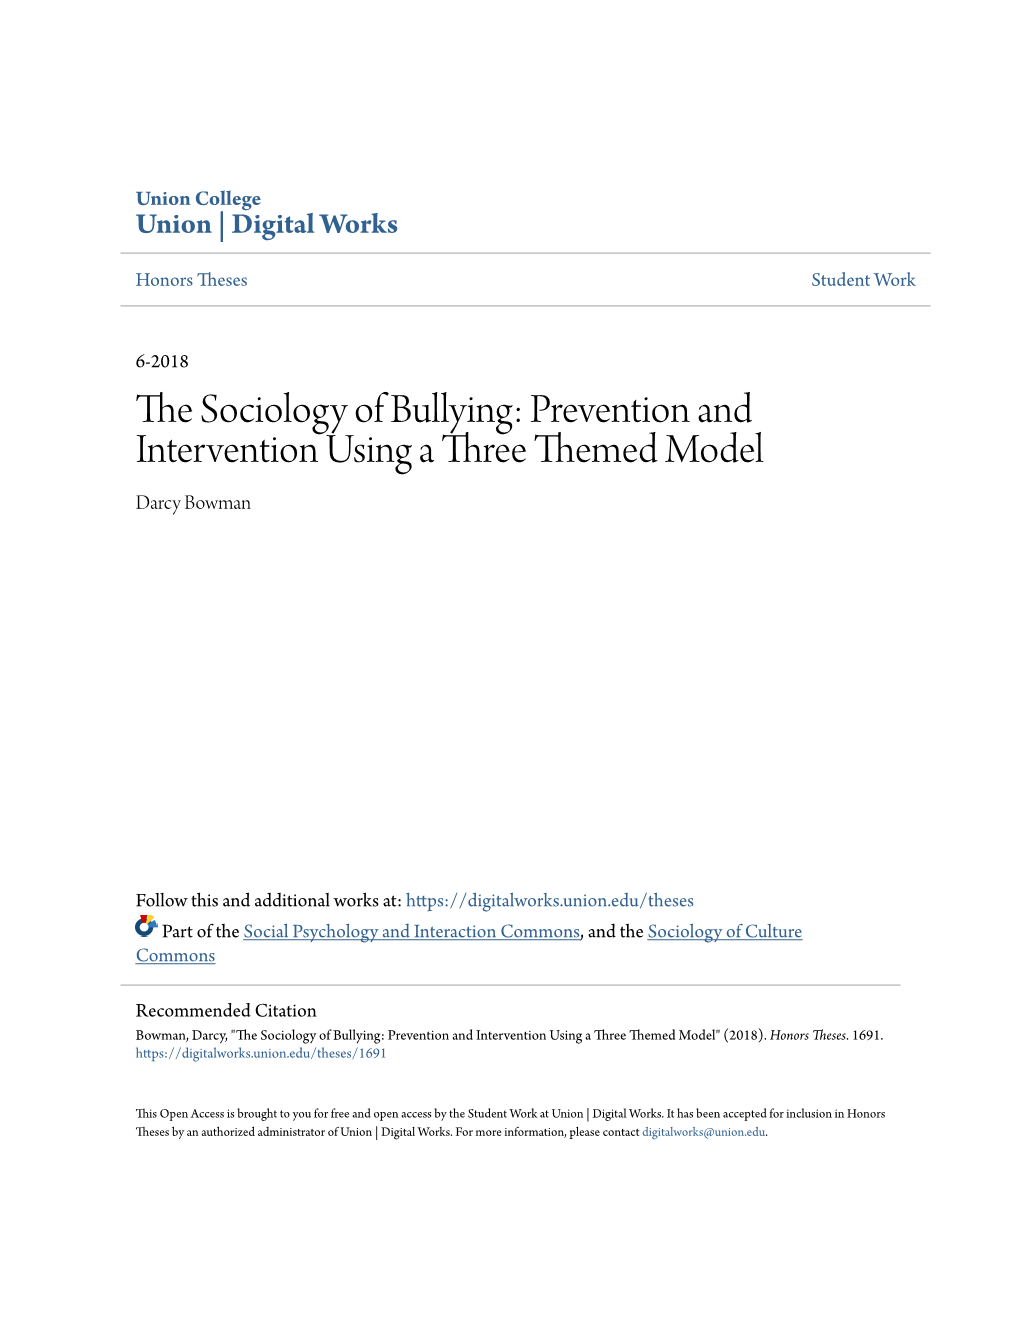 The Sociology of Bullying: Prevention and Intervention